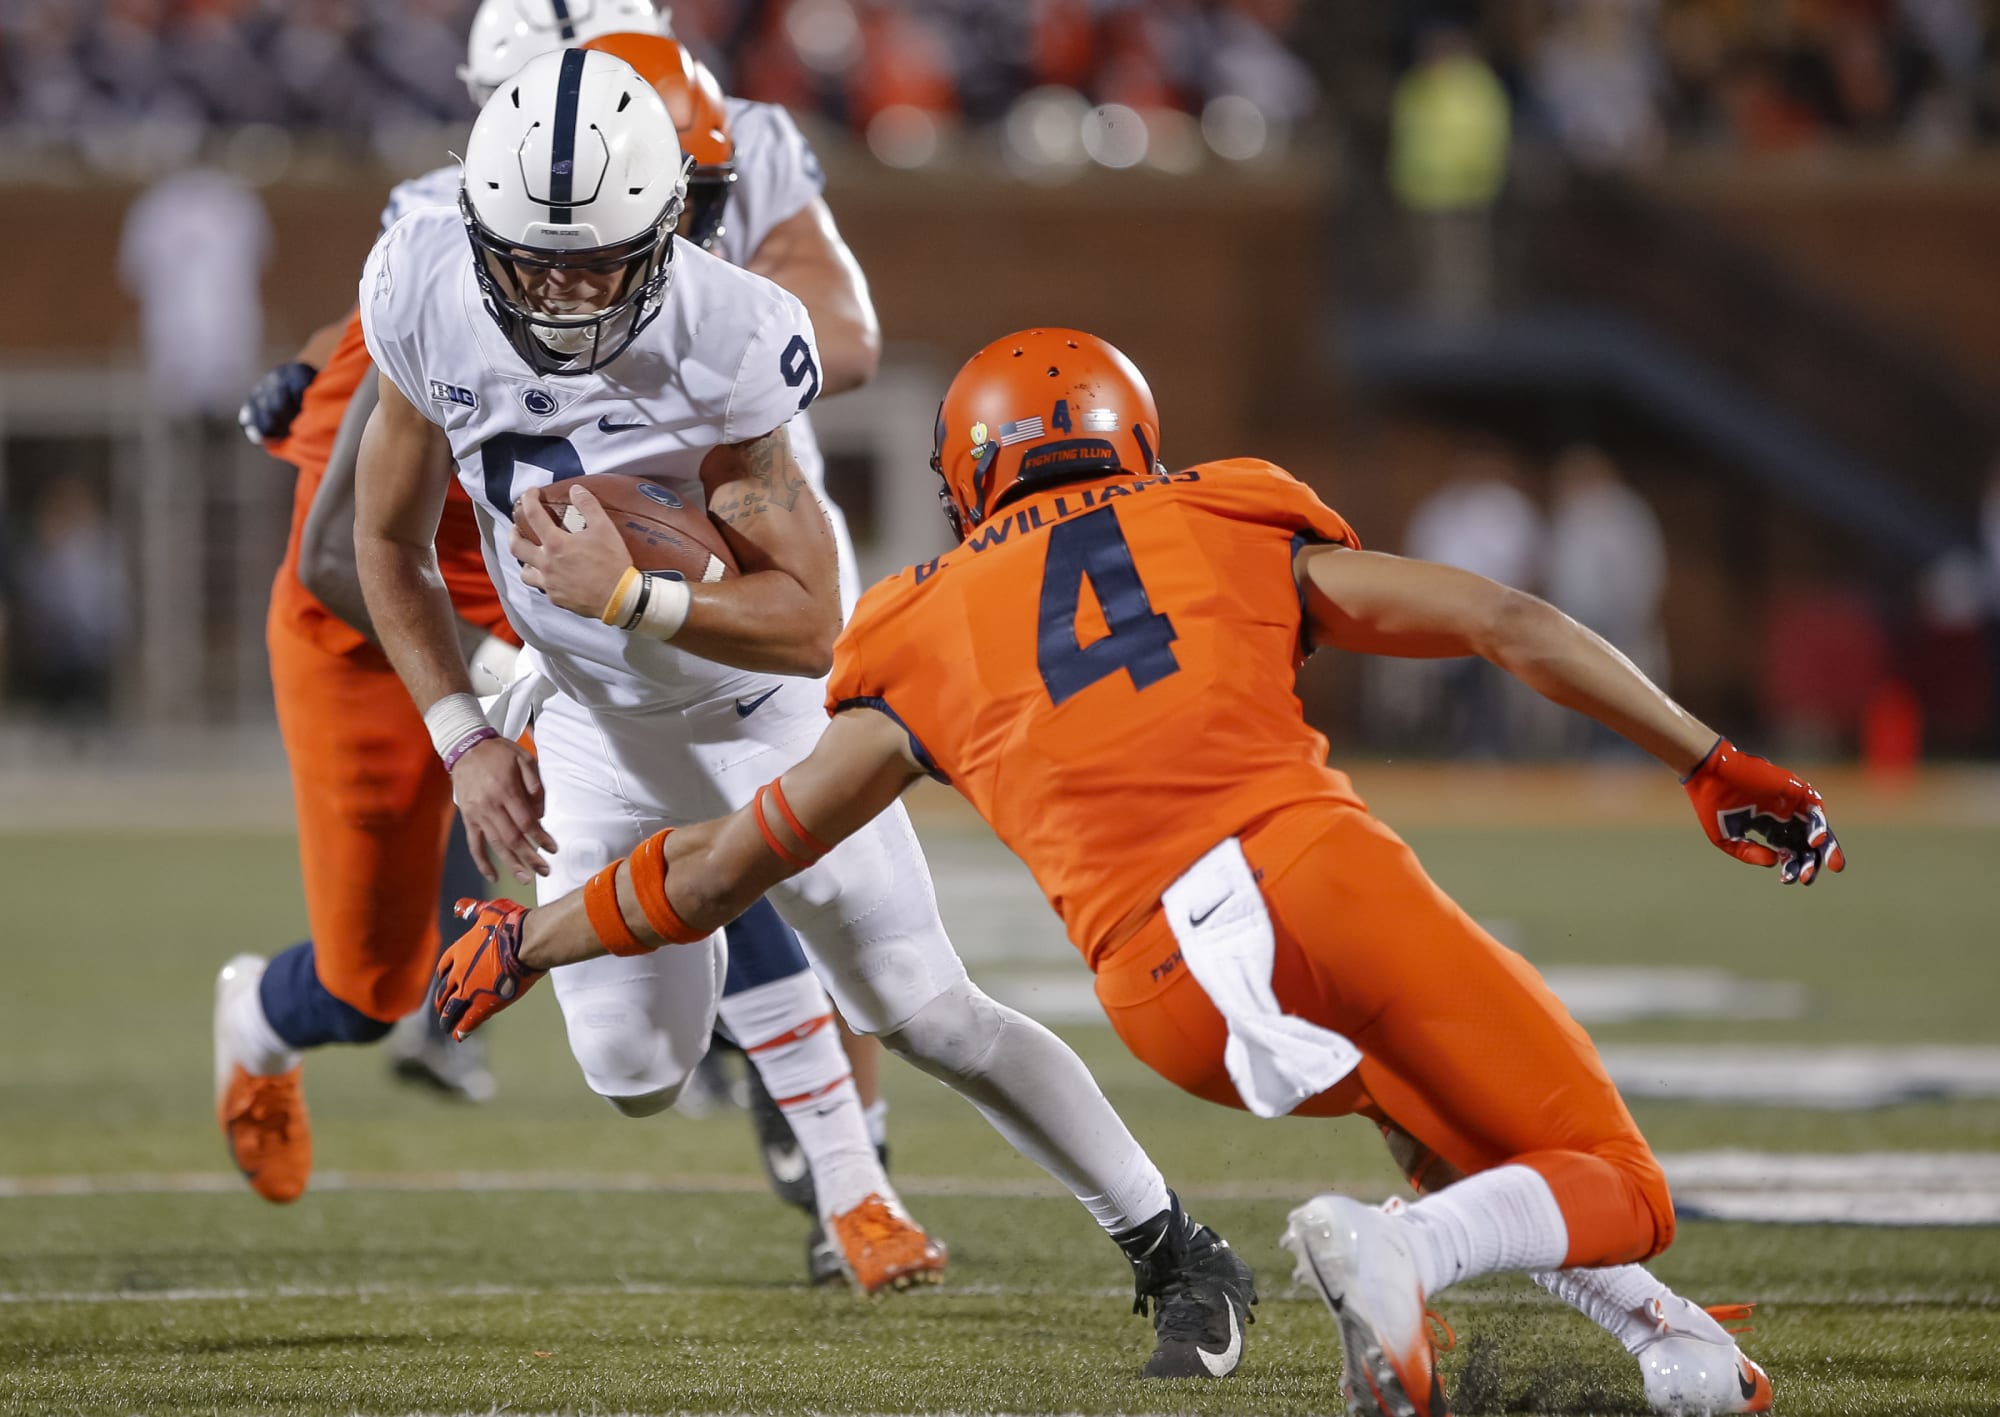 Illinois Football 3 quick takeaways from comeback win over UConn